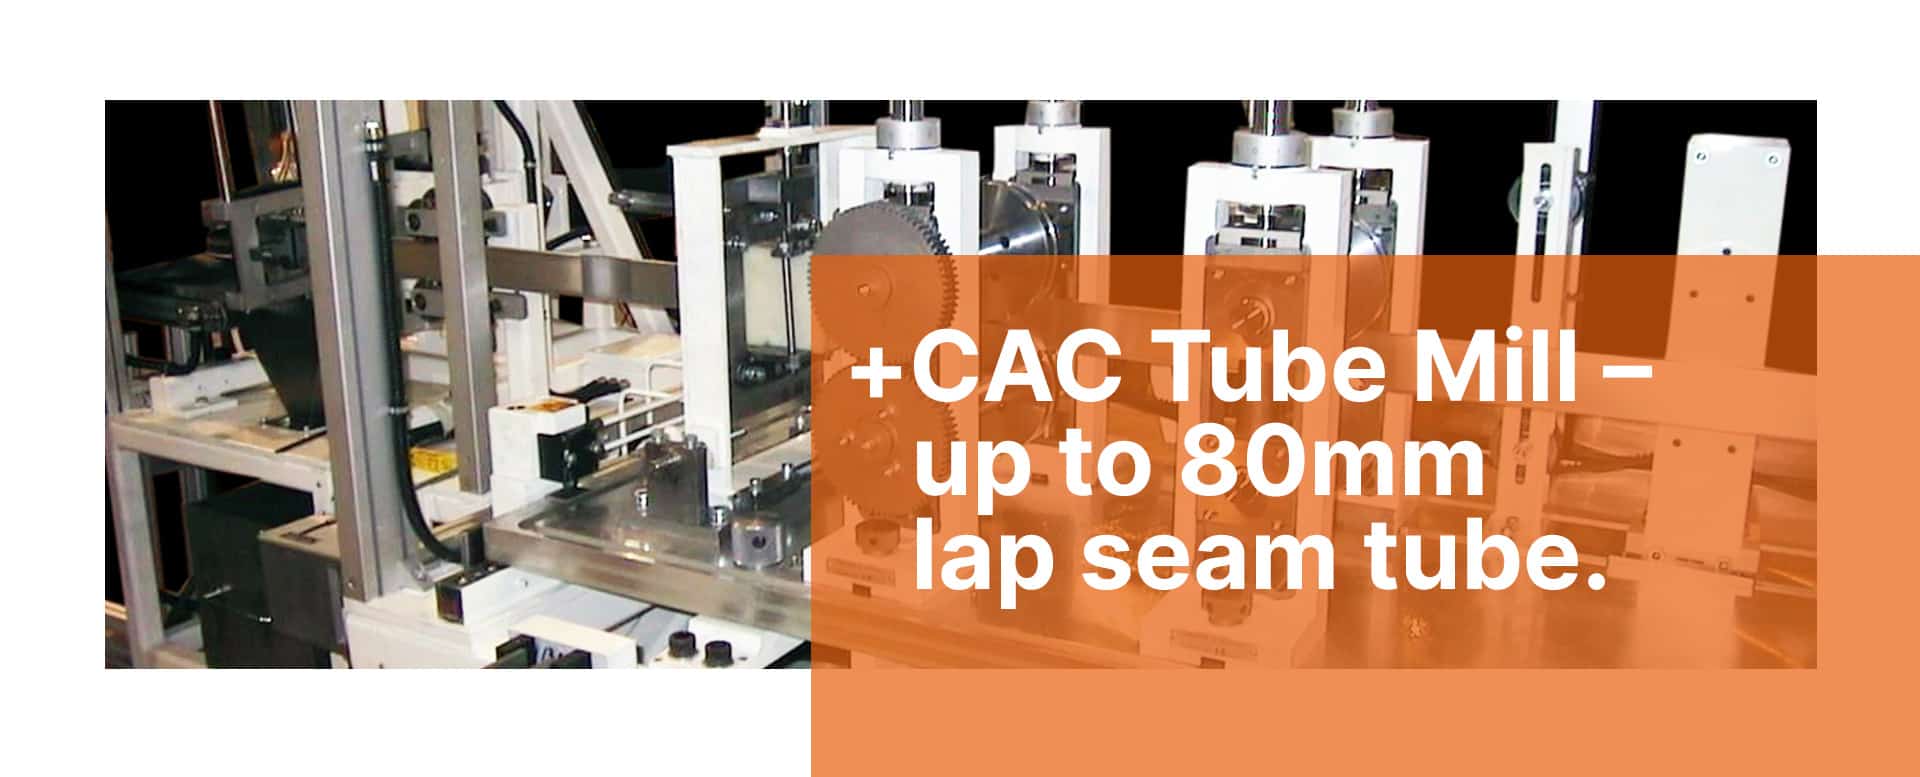 CAC Tube Mill